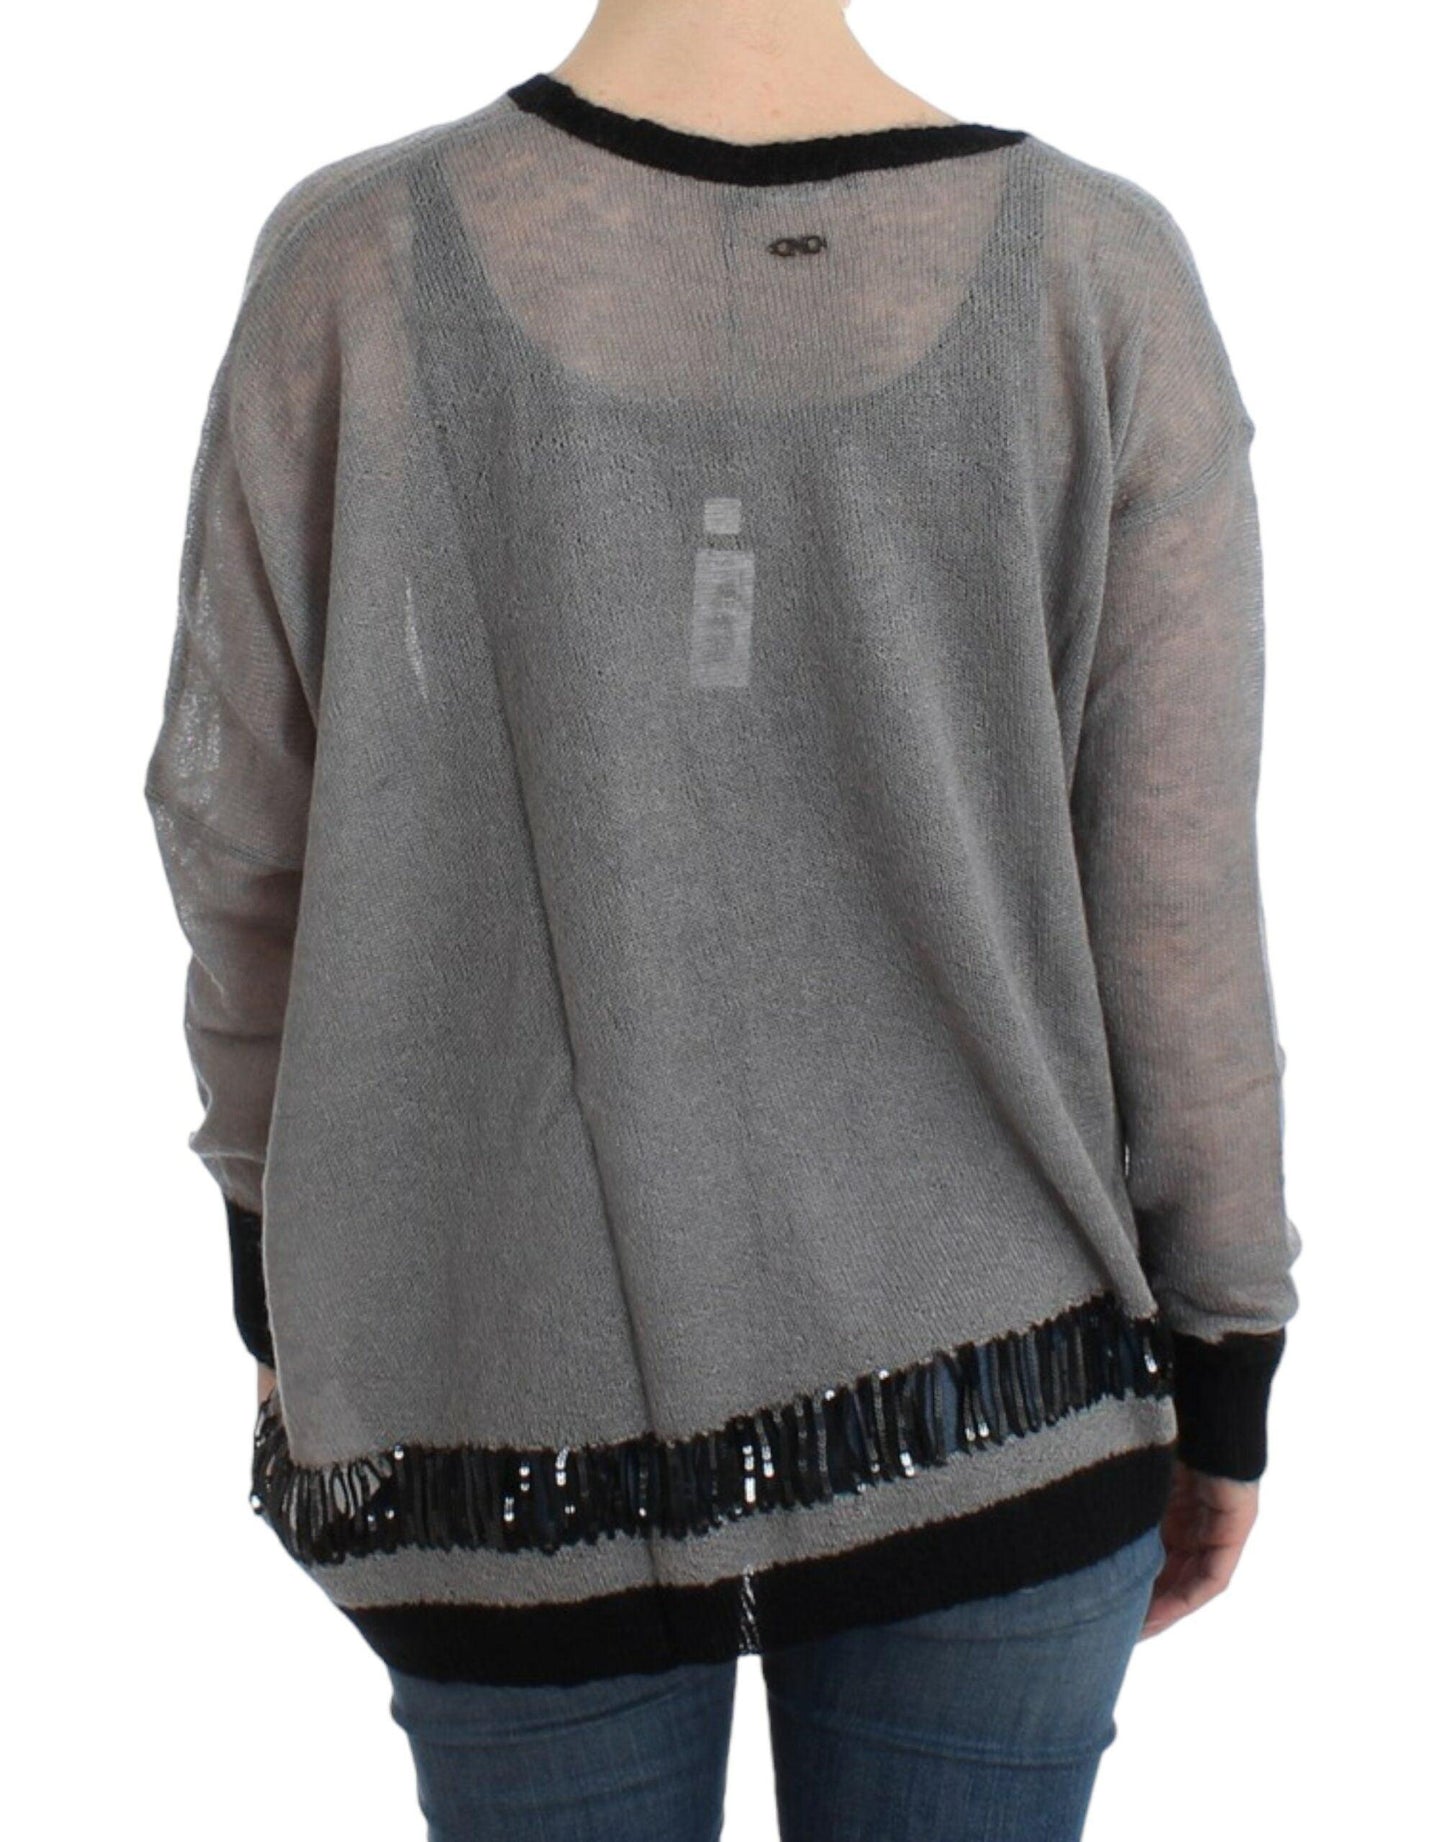 Costume National Chic Asymmetric Embellished Knit Sweater - PER.FASHION